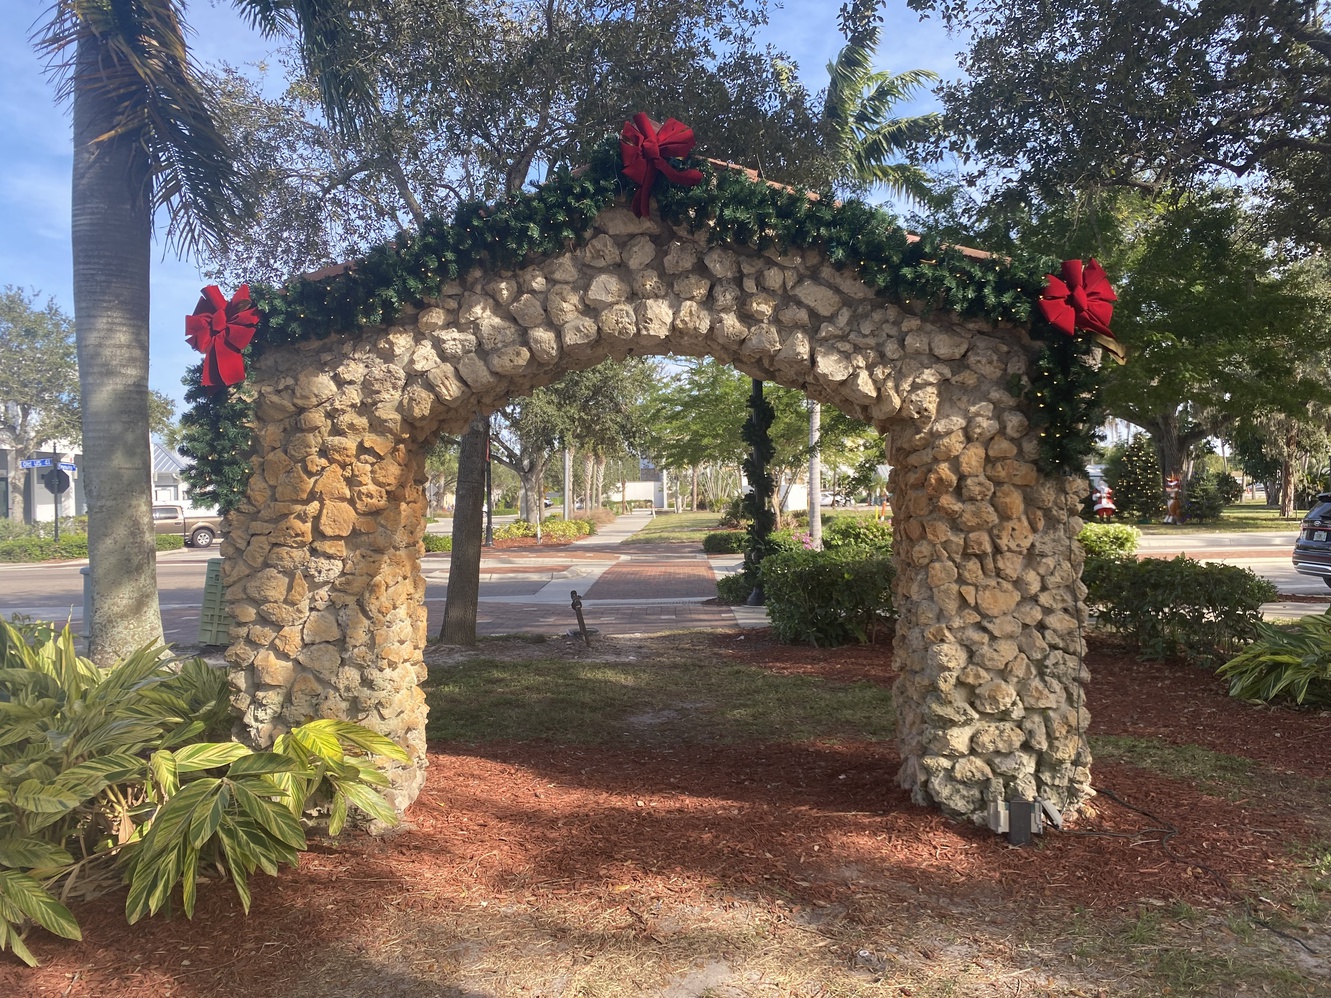 This arch is decorated with green boughs and twinkling lights
      for Christmas.